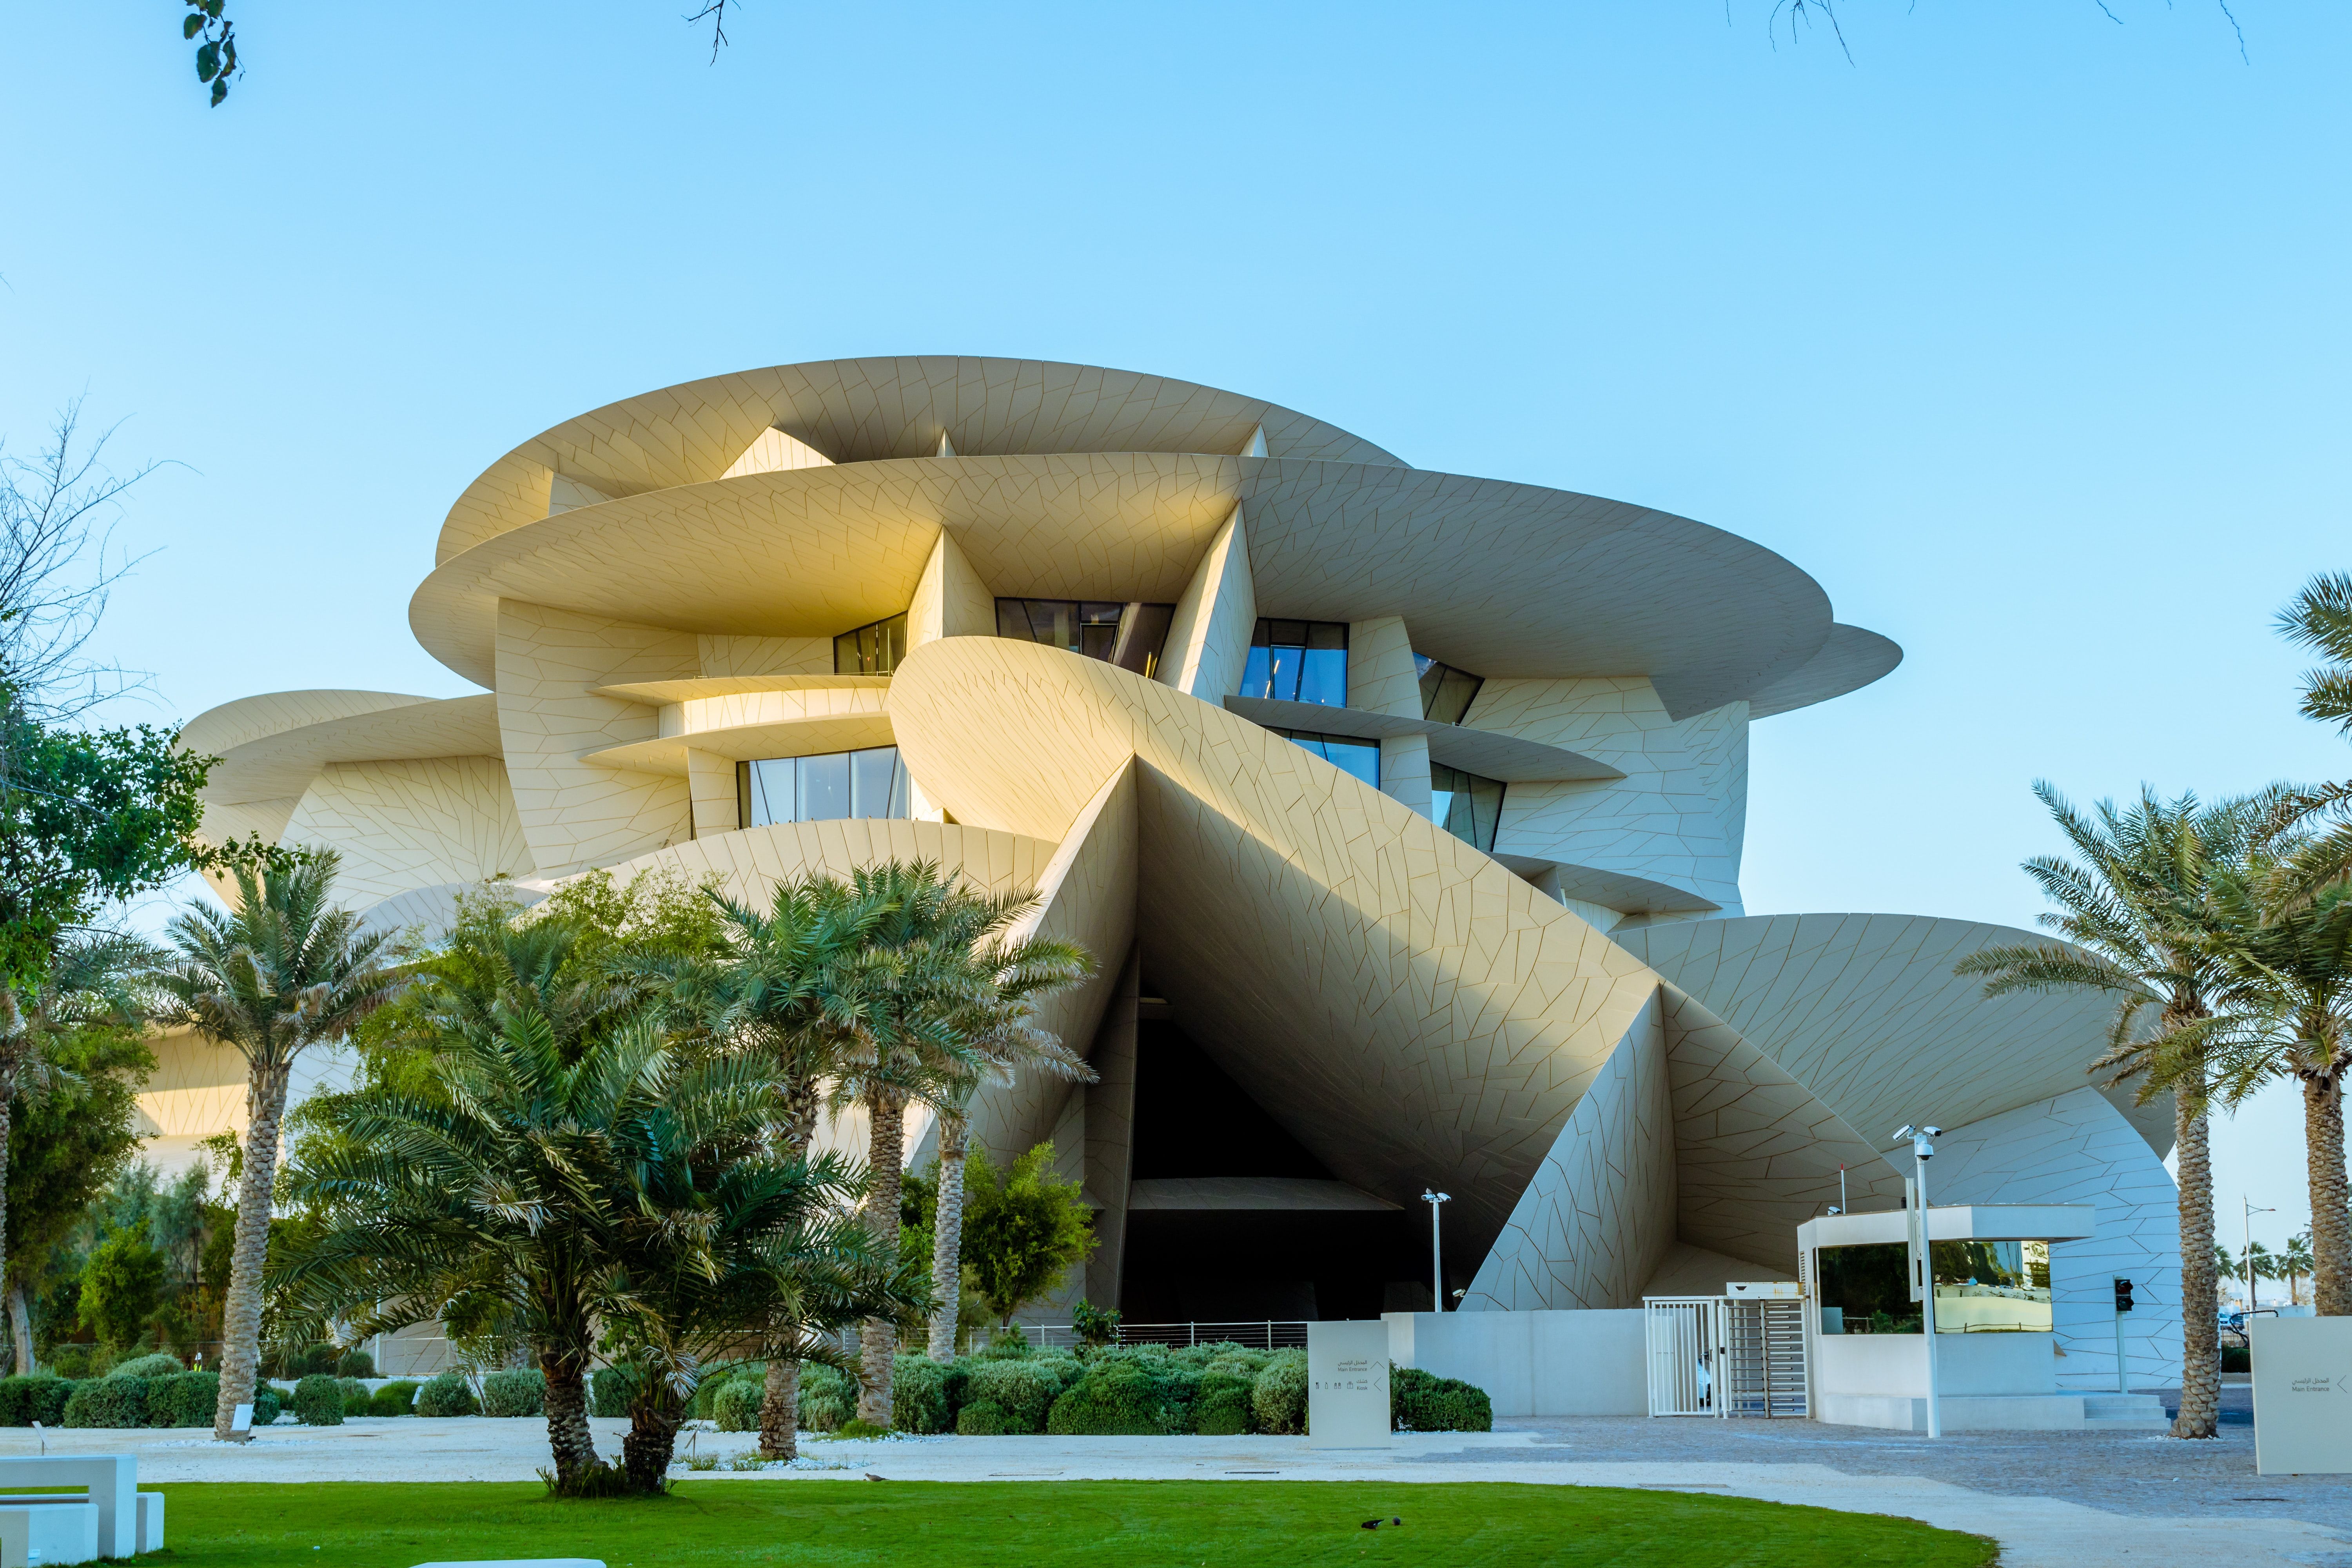 The National Museum of Qatar in Doha on a bright sunny day, with grass and palm trees in the foreground.